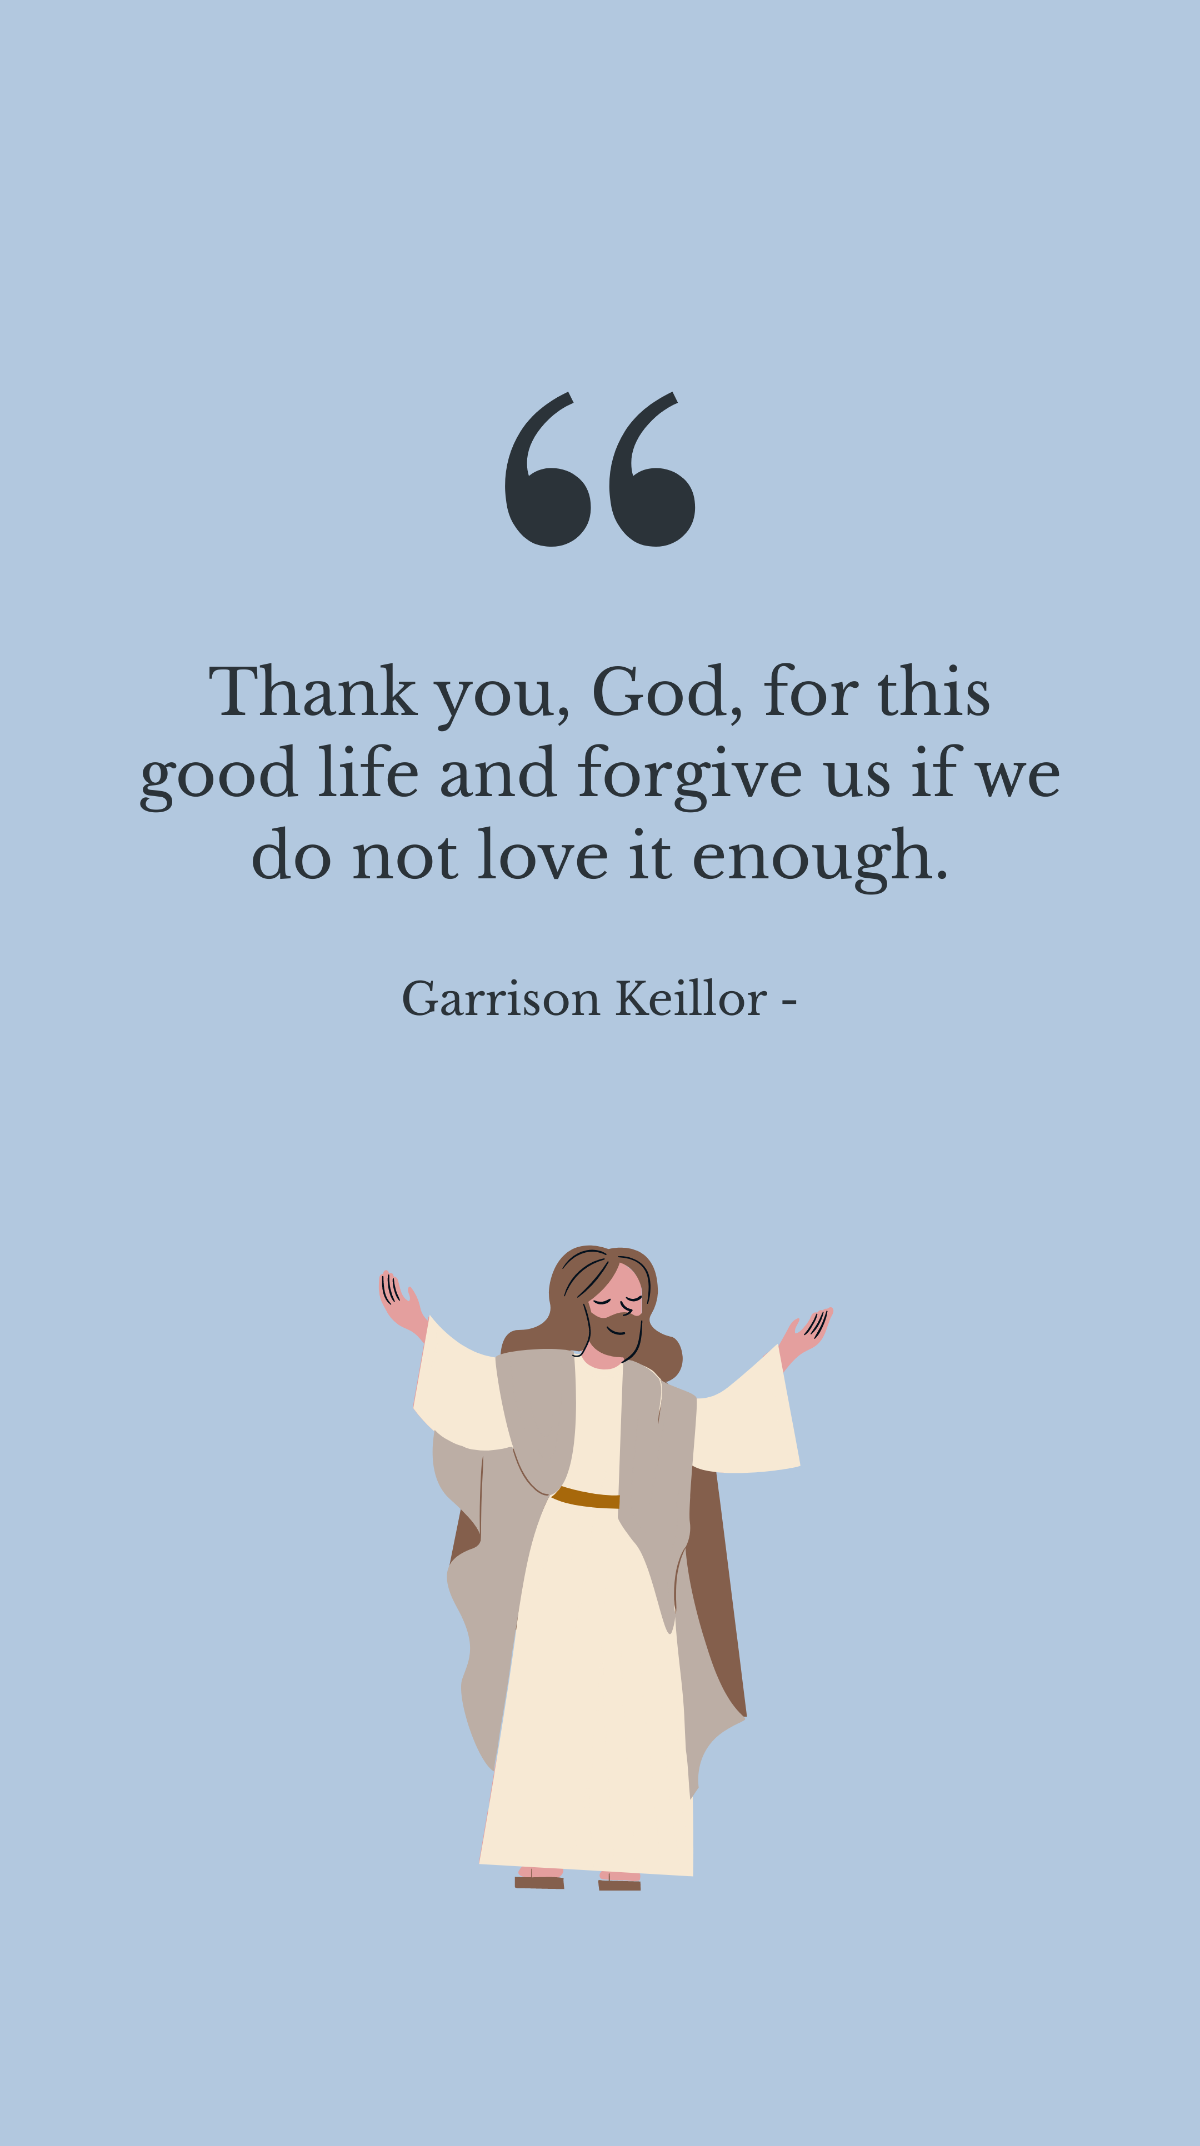 Free Garrison Keillor - Thank you, God, for this good life and forgive us if we do not love it enough. Template